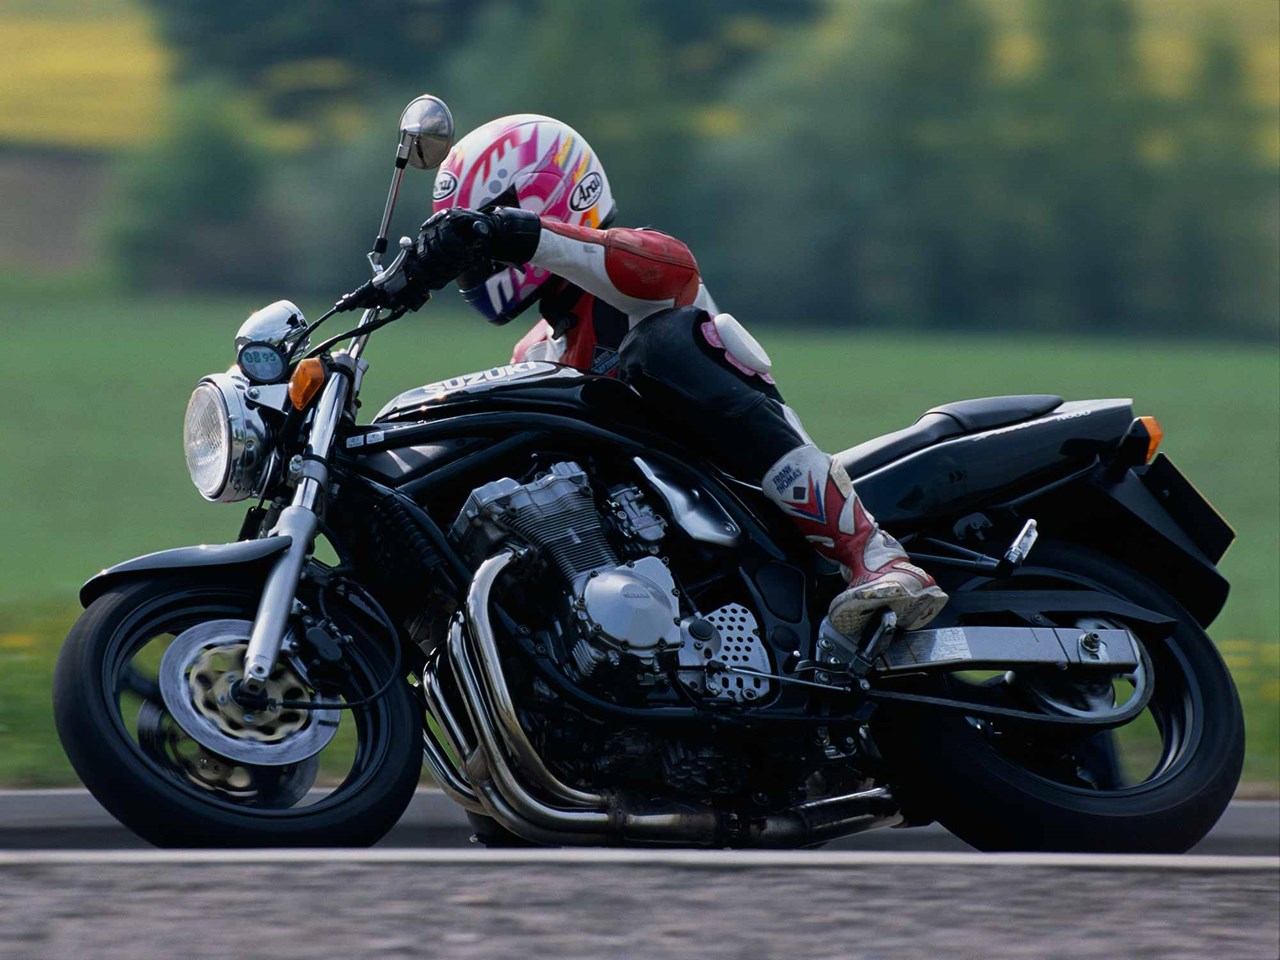 Suzuki Bandit 600 (1996-2005) review and used buying guide